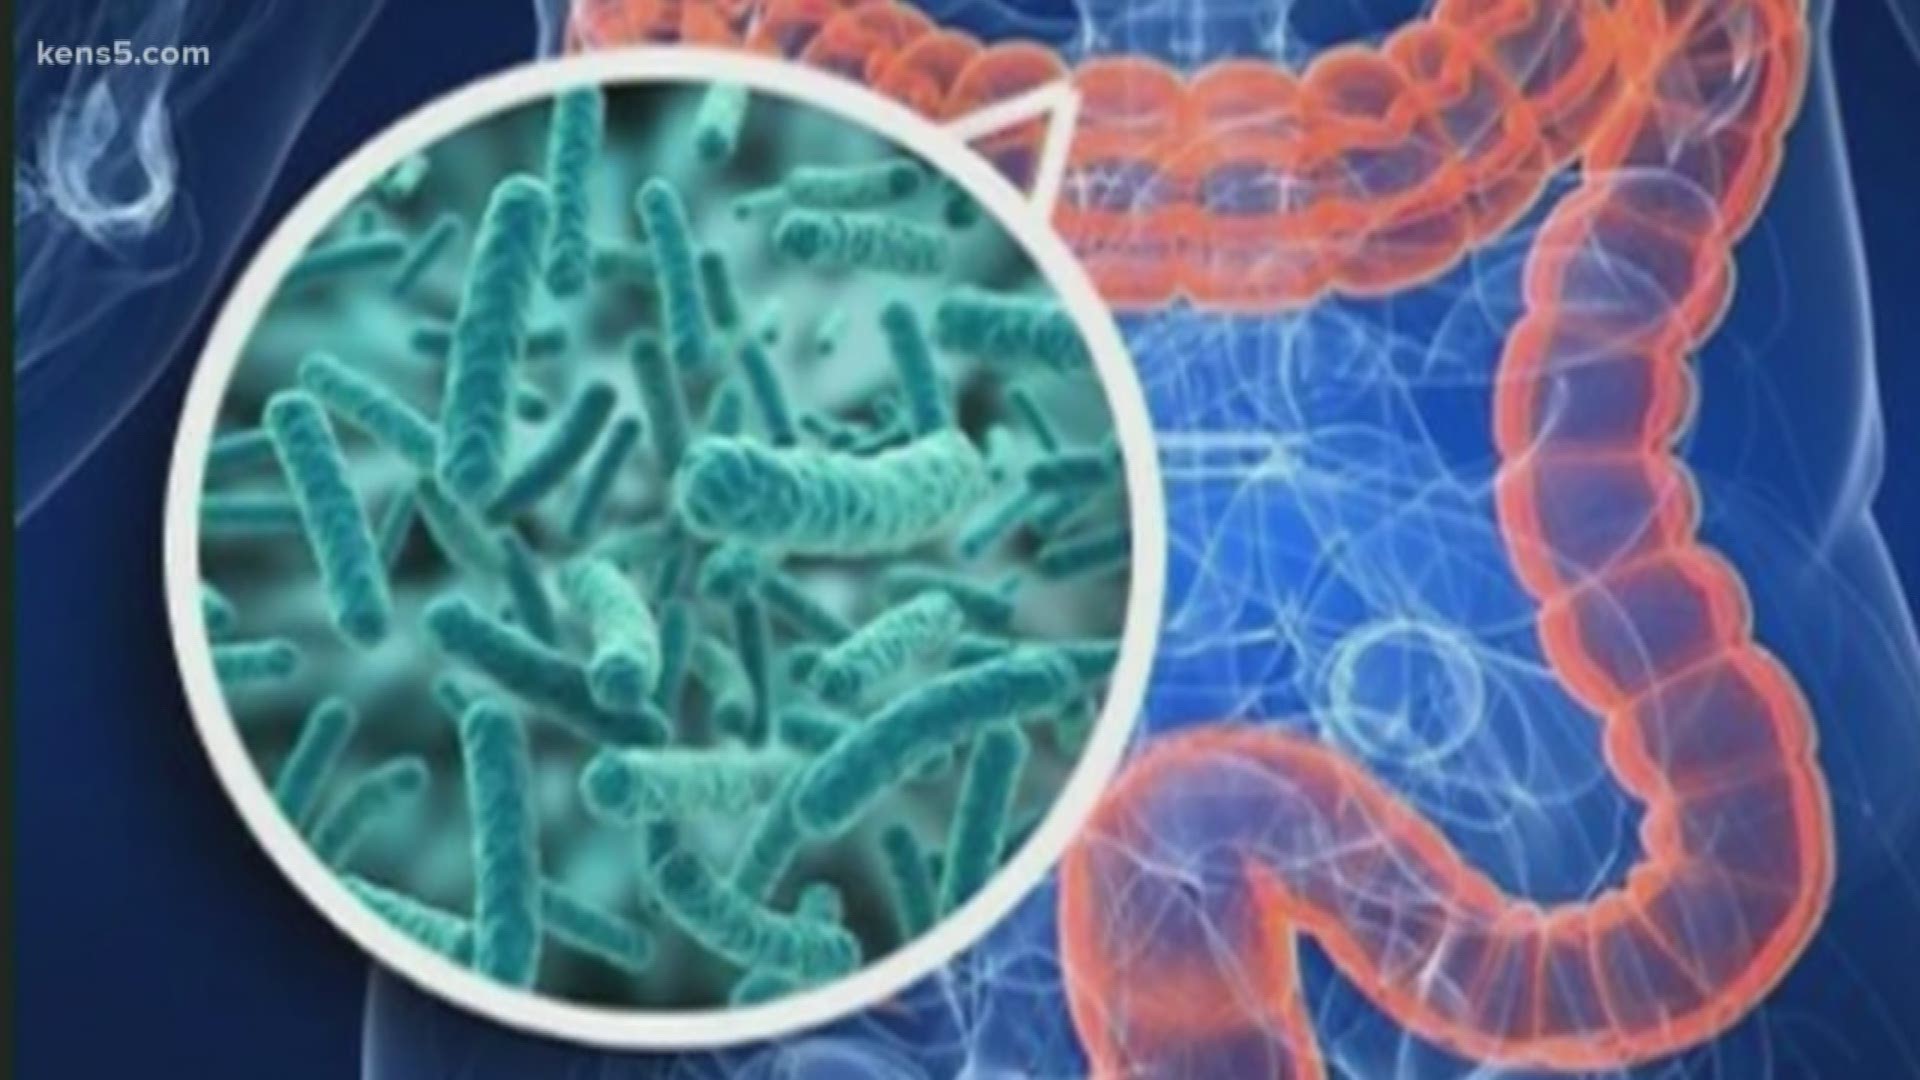 Well over 100,000 people in the U.S. will be diagnosed with colorectal cancer this year, and close to half of them will die. Eyewitness News reporter Jeremy Baker introduces us to one woman who caught the disease early, and is living to spread awareness about the need to get screened.